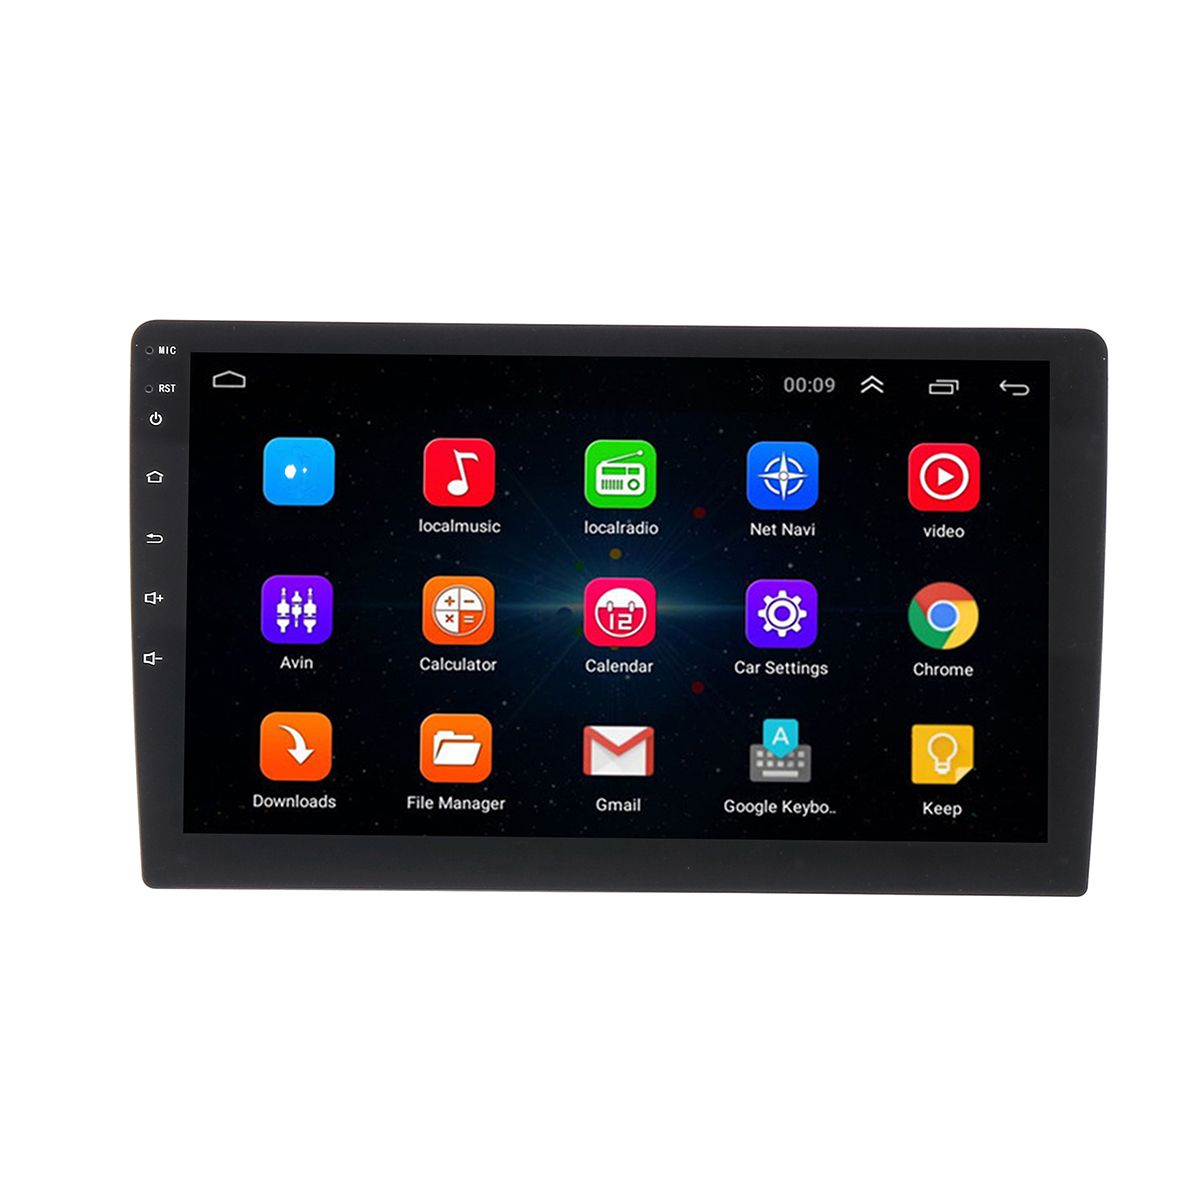 Android-81-101quot-Adjustable-HD-Car-Stereo-Radio-GPS-Wifi-Mirror-Link-Bluetooth-1490844